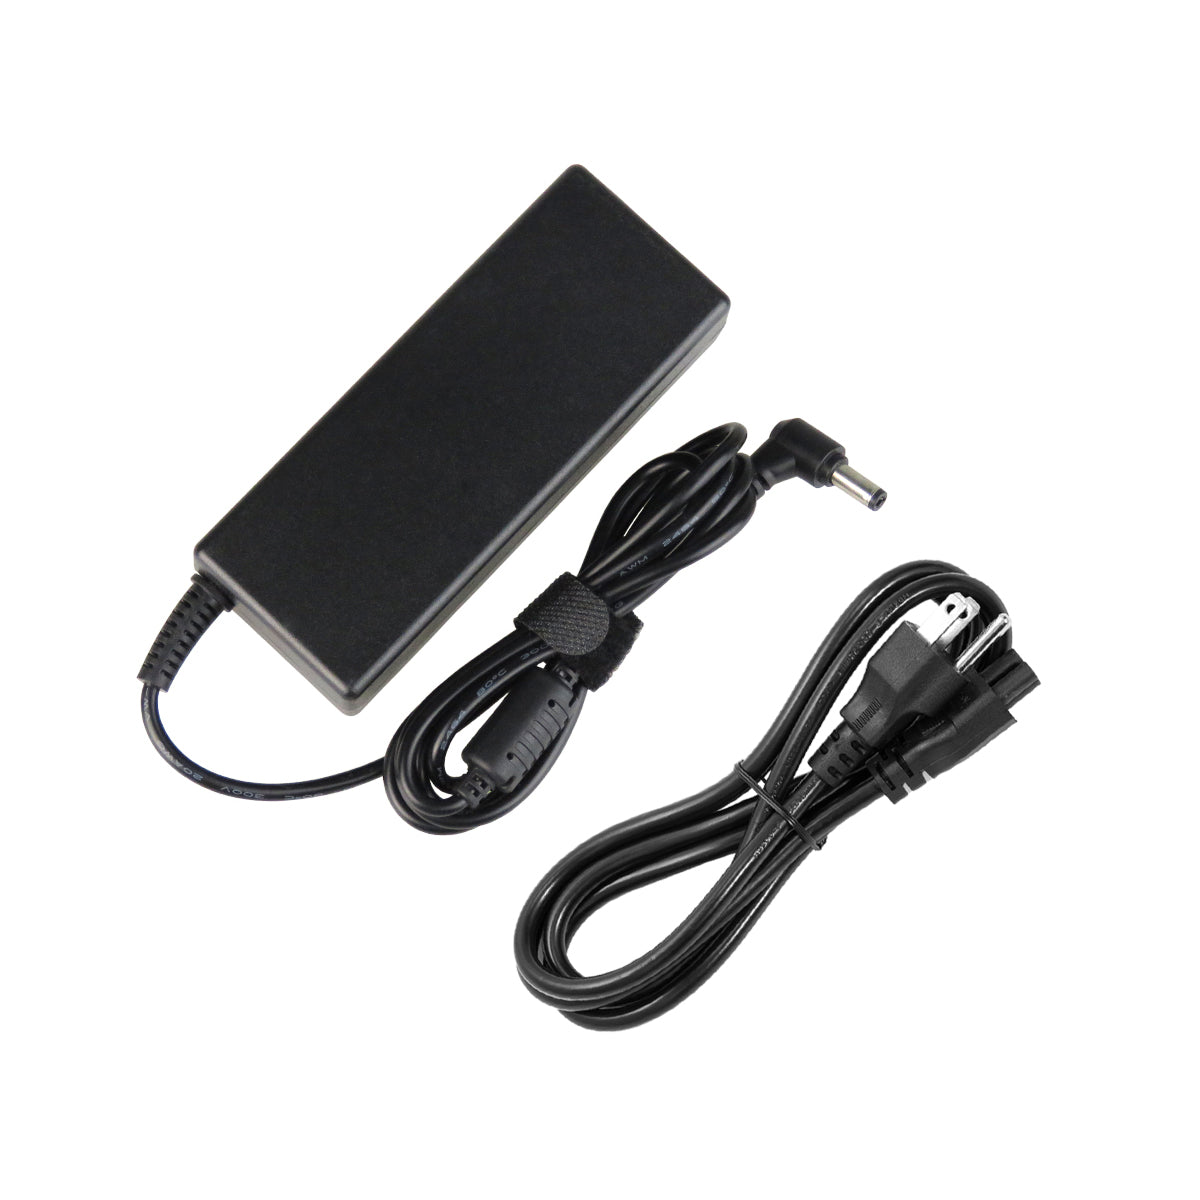 AC Adapter Charger for ASUS X54C-BBK19 Notebook.